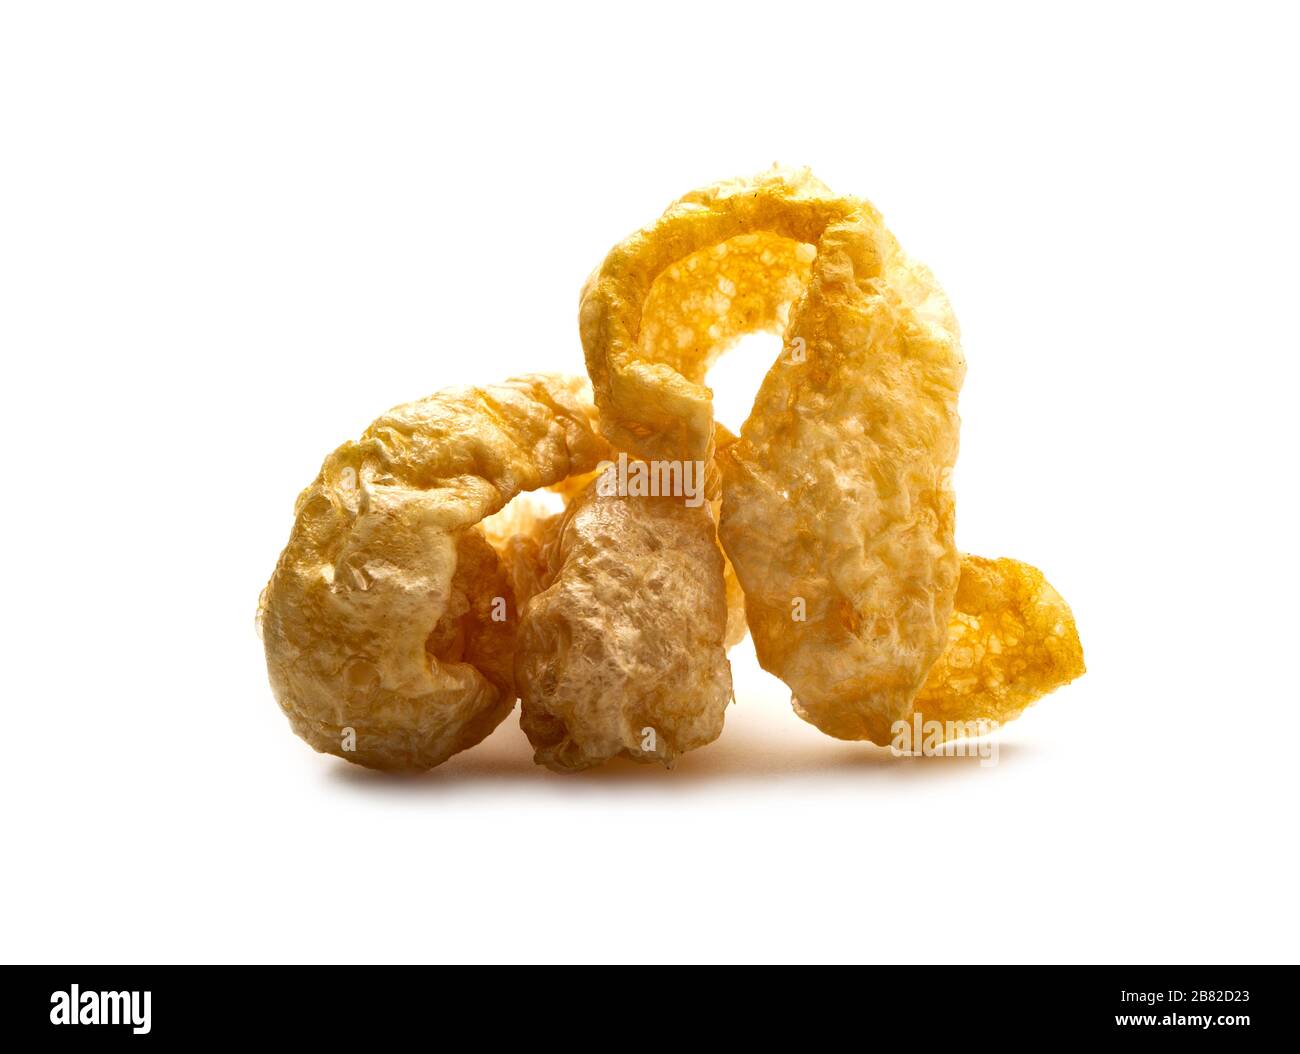 Pork snack crispy and blistered isolated on white background. Crispy pork skin pieces. Food concept. Stock Photo